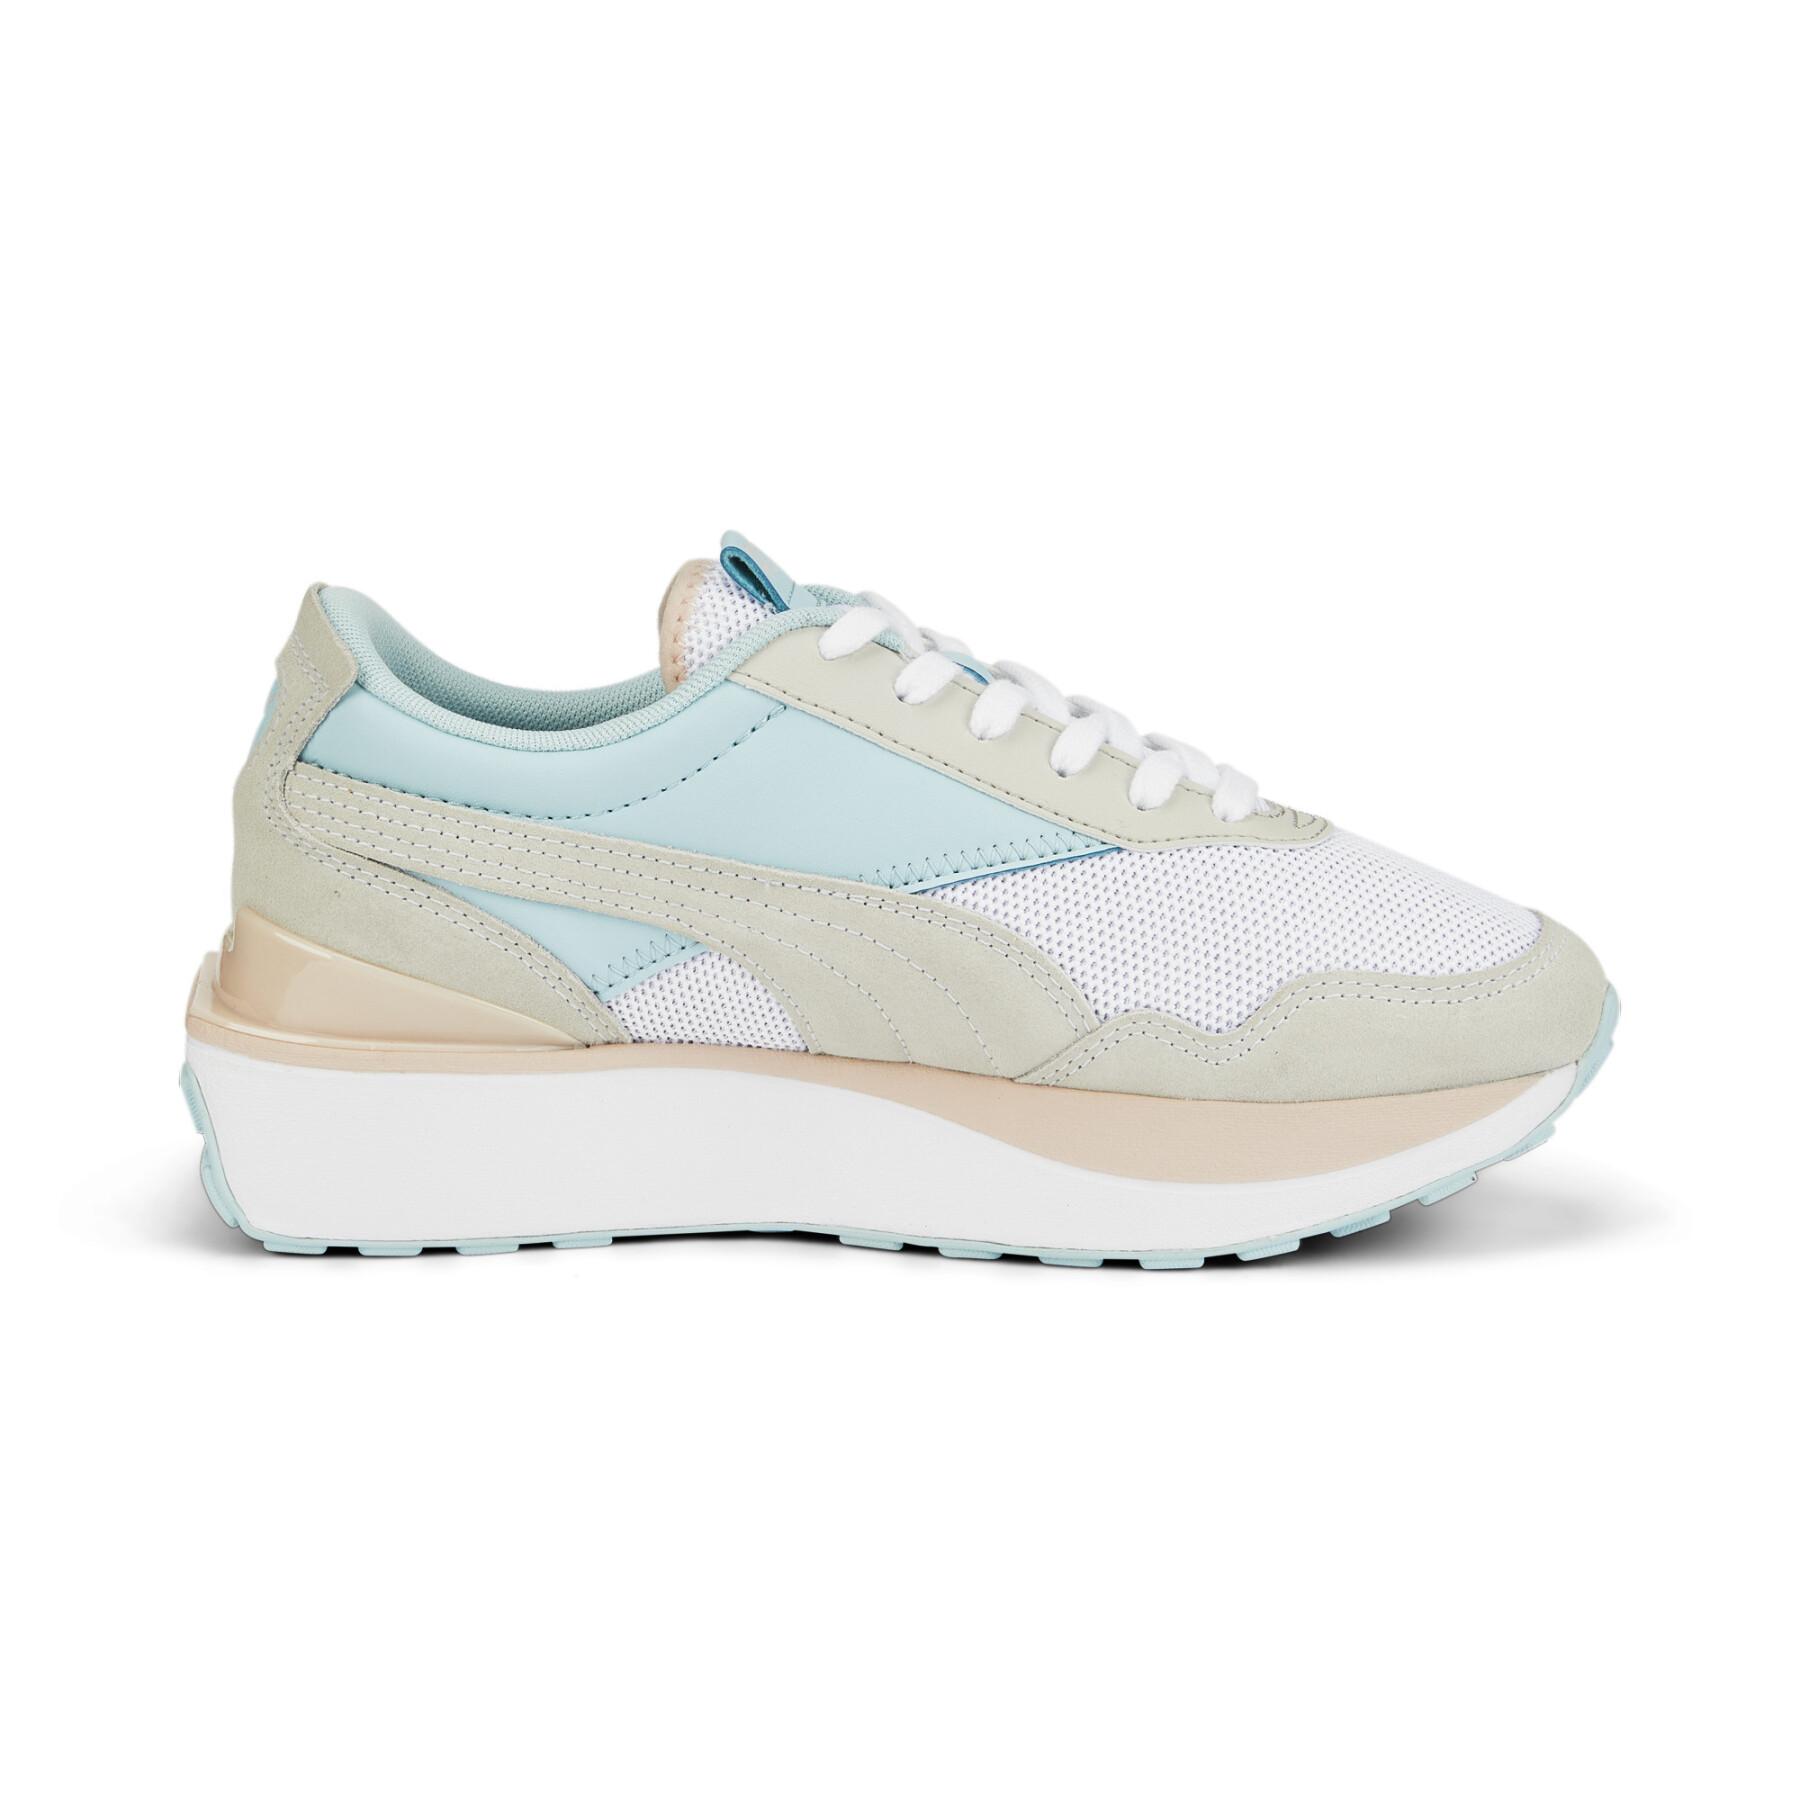 Women's sneakers Puma Cruise Rider Candy